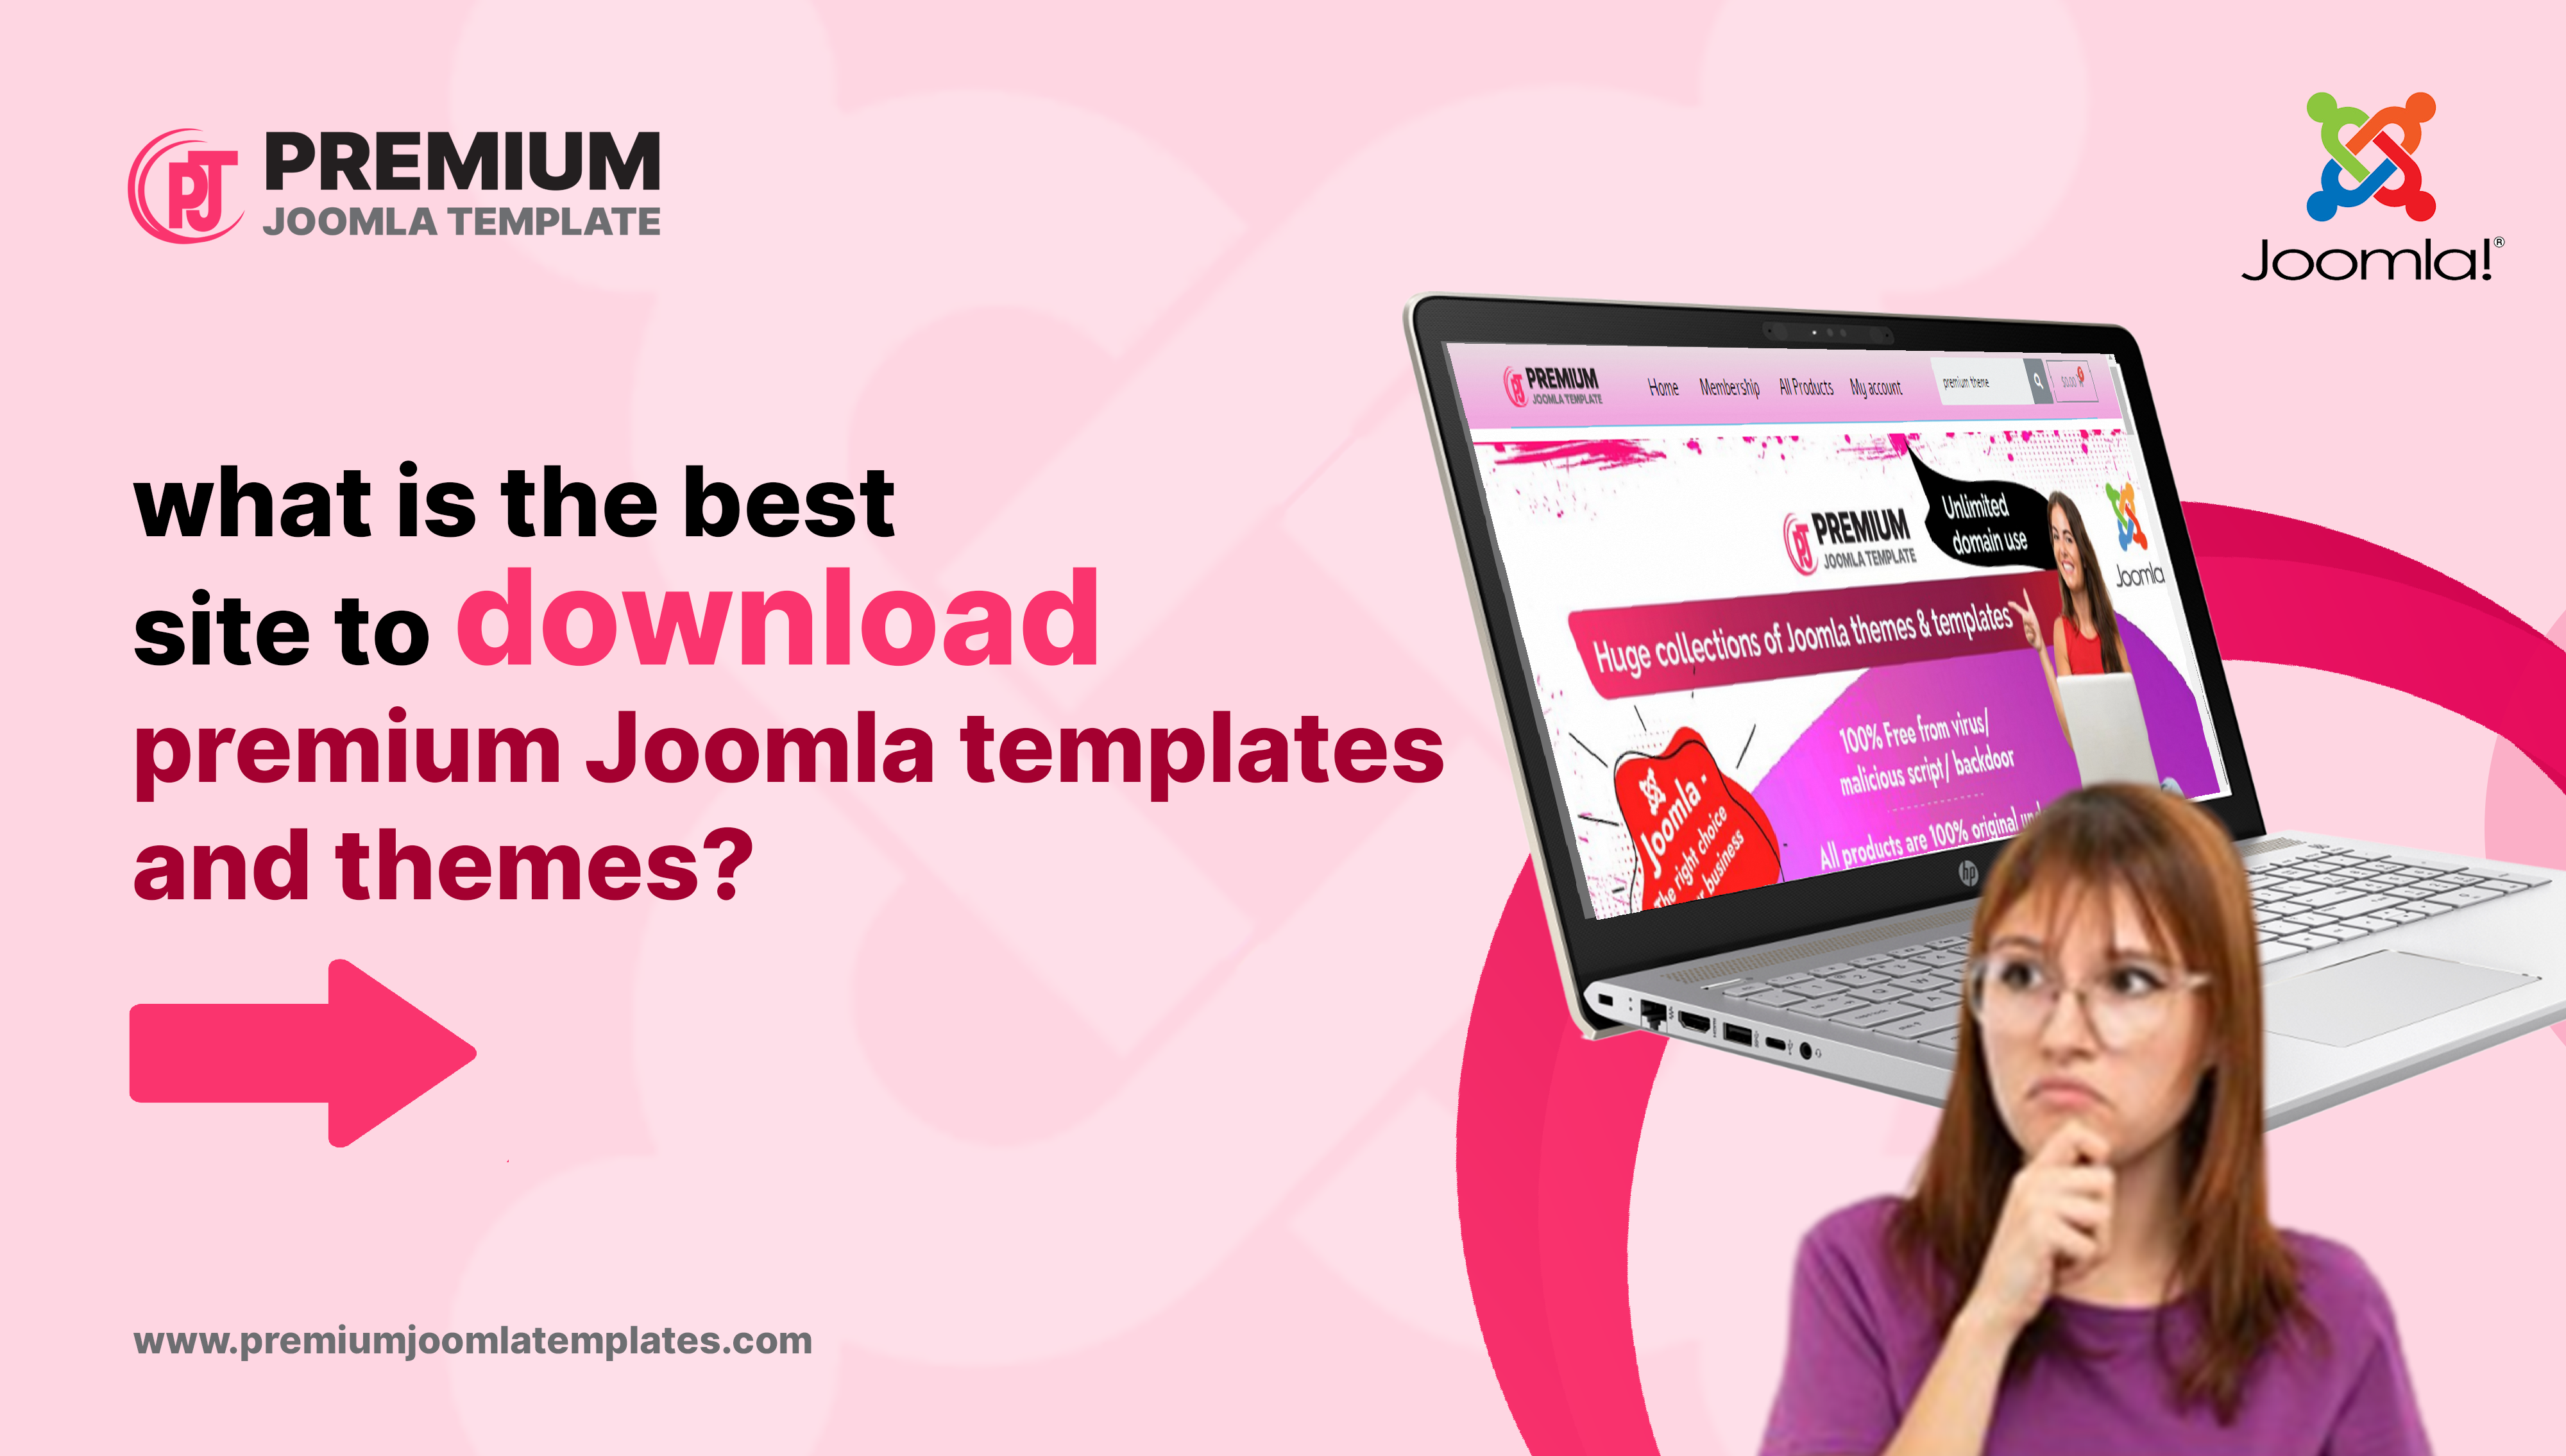 What is the best site to download premium Joomla templates and themes?